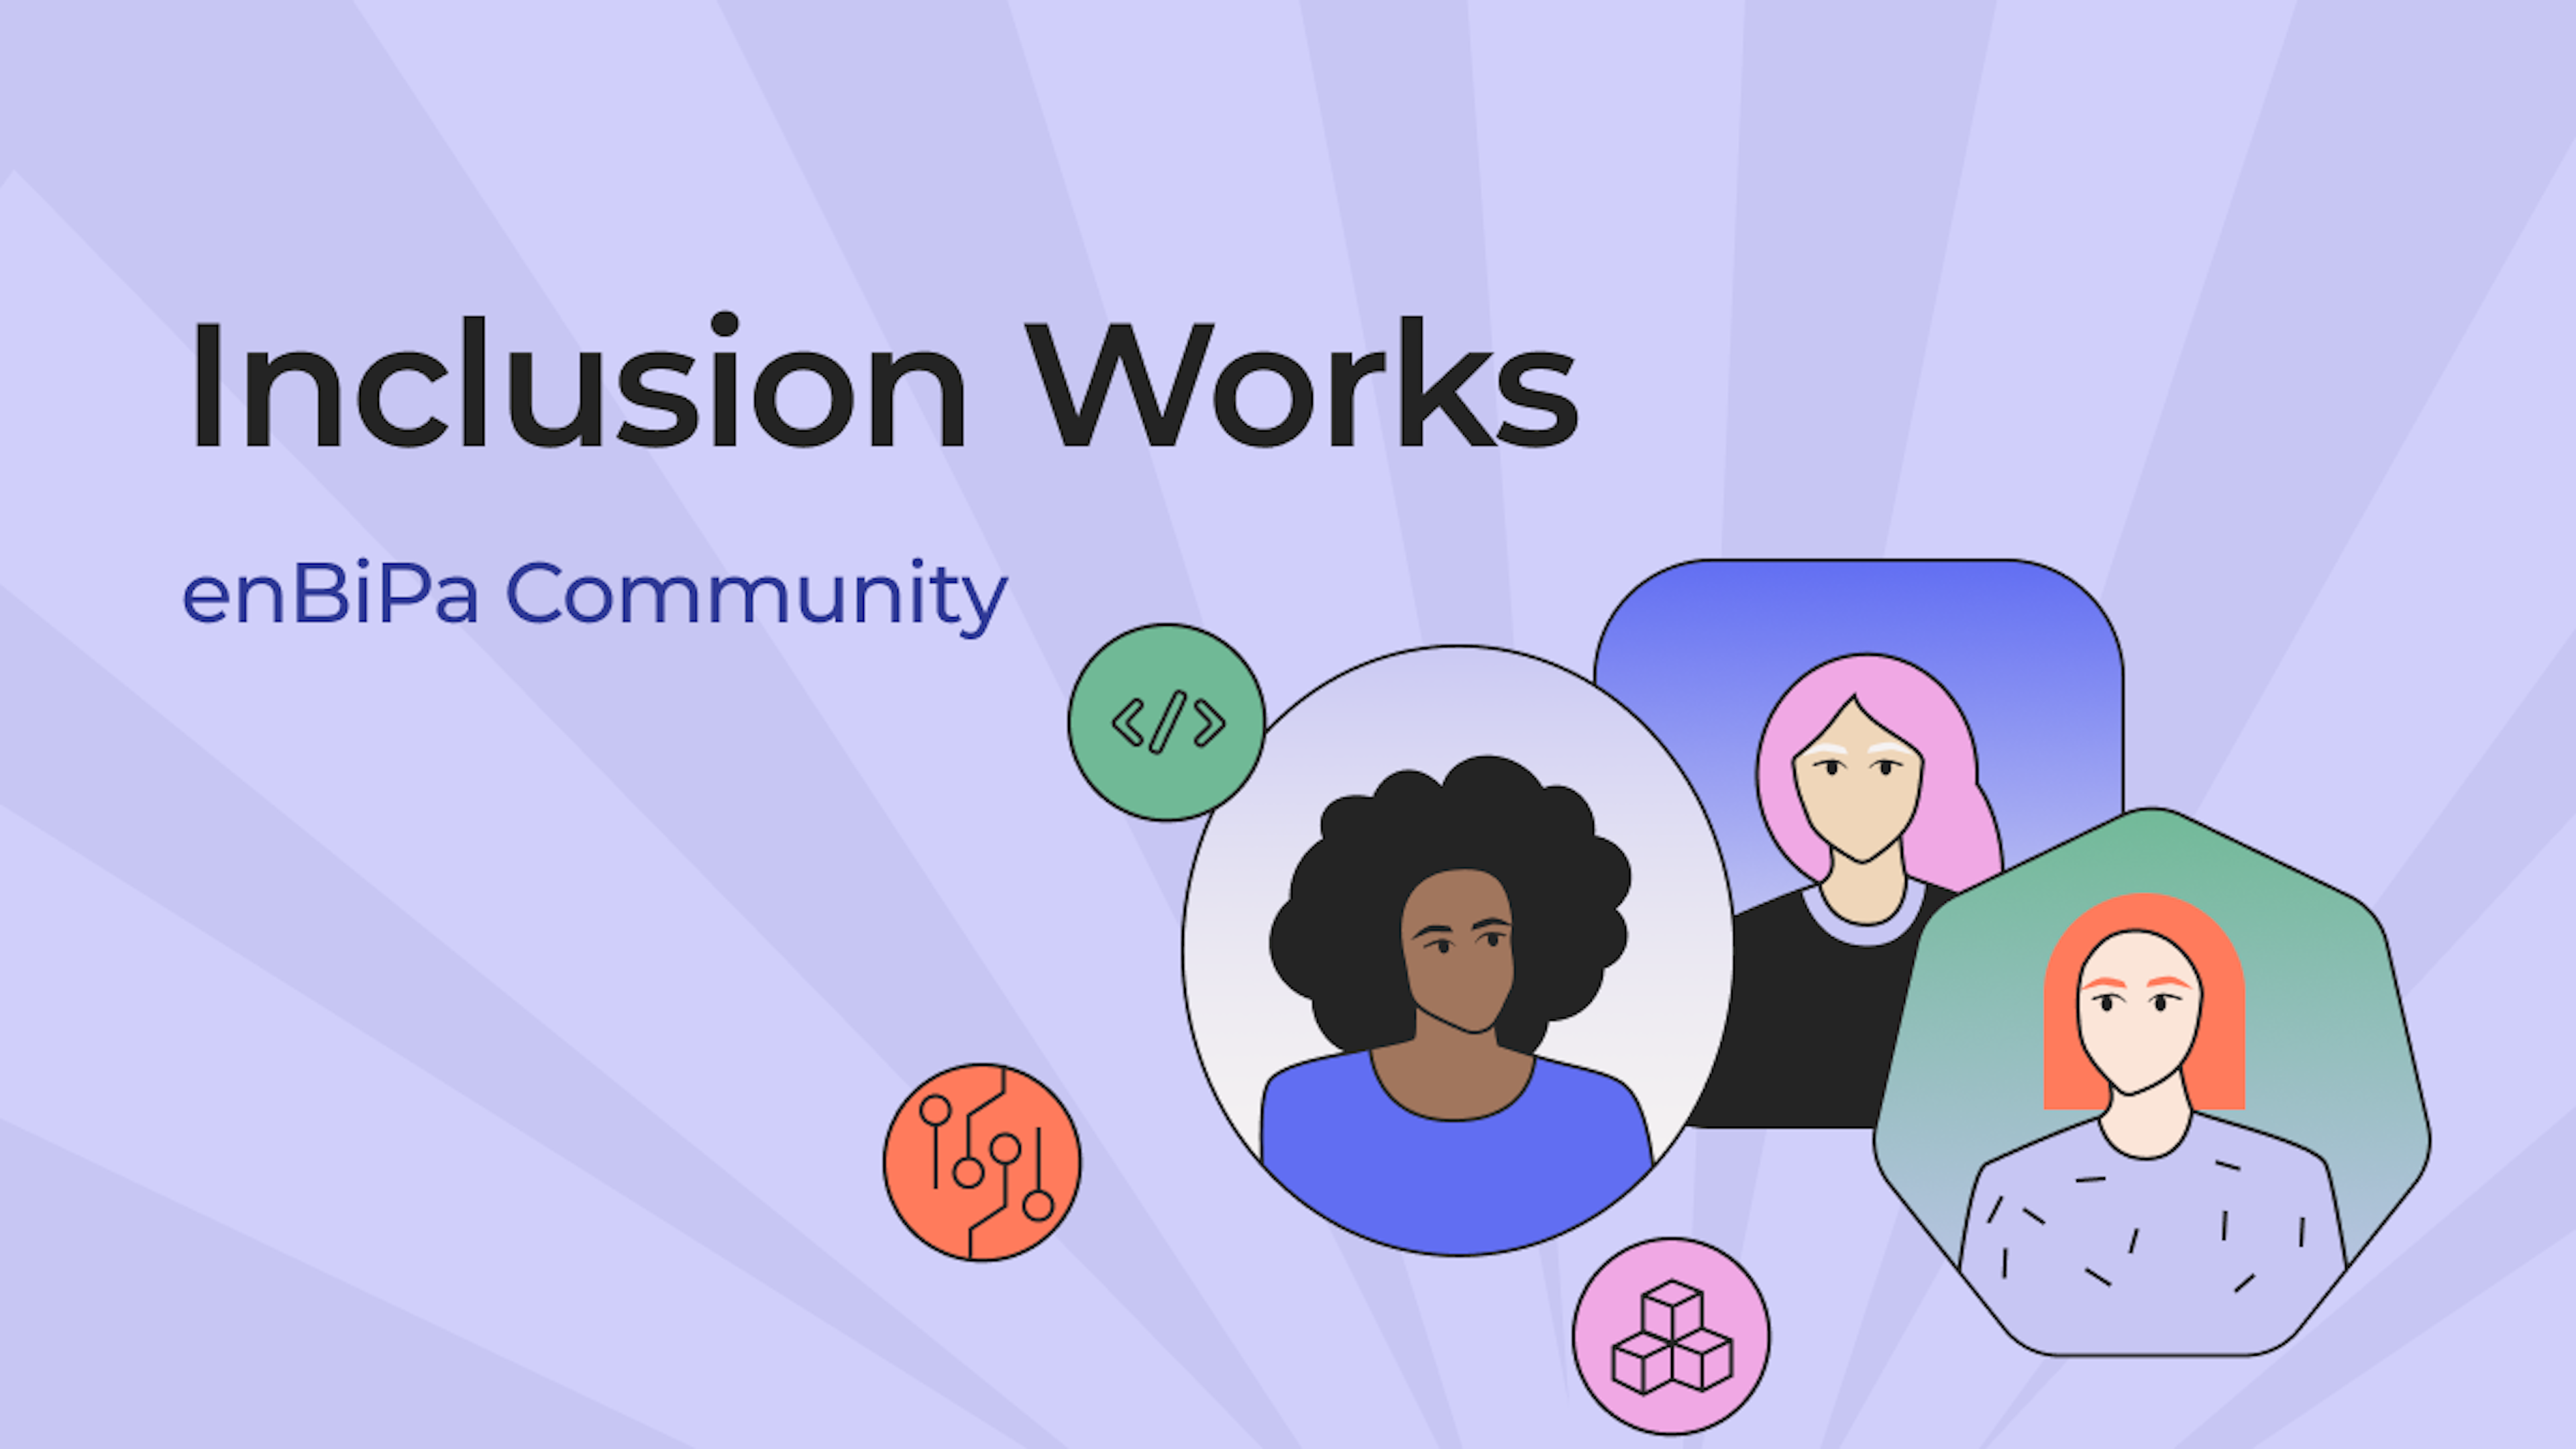 Inclusion Works: Discover enBiPa - a non-profit community run by women & queers